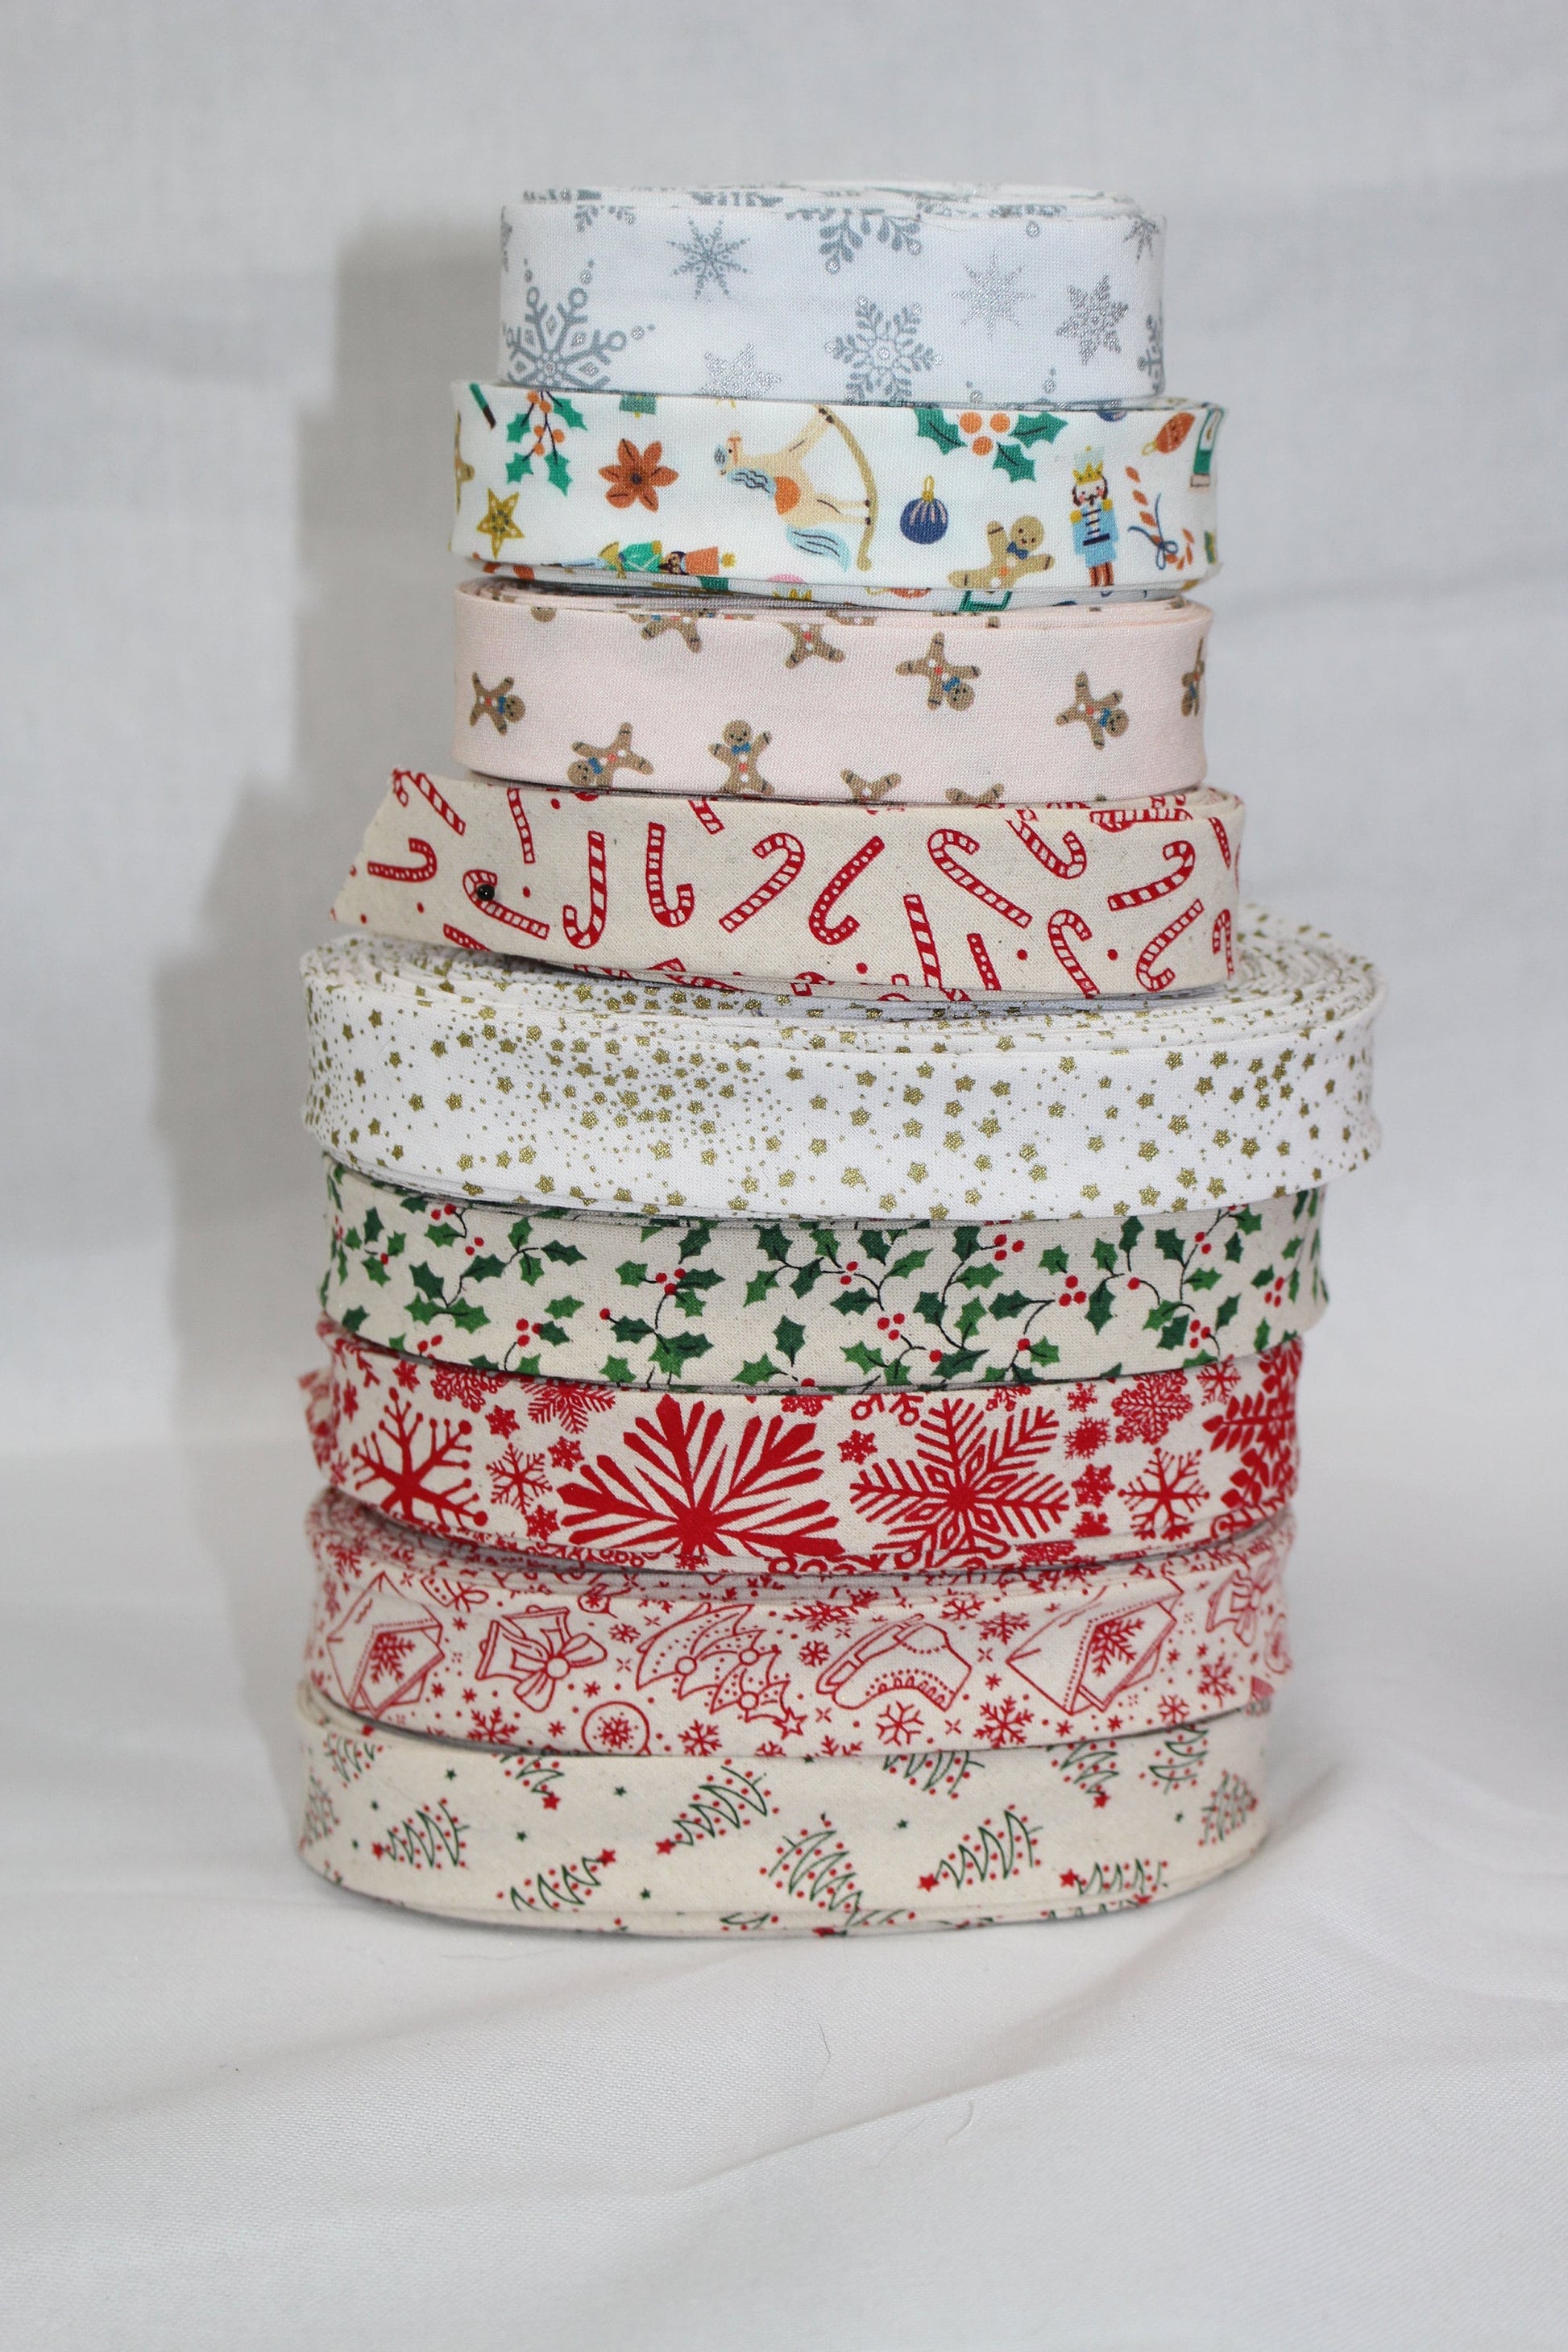 Christmas bias tape binding/(fusible iron on available)/single fold/1 inch wide(1m)/snowflakes/glitter/mistletoe/candy canes/Xmas tree/stars